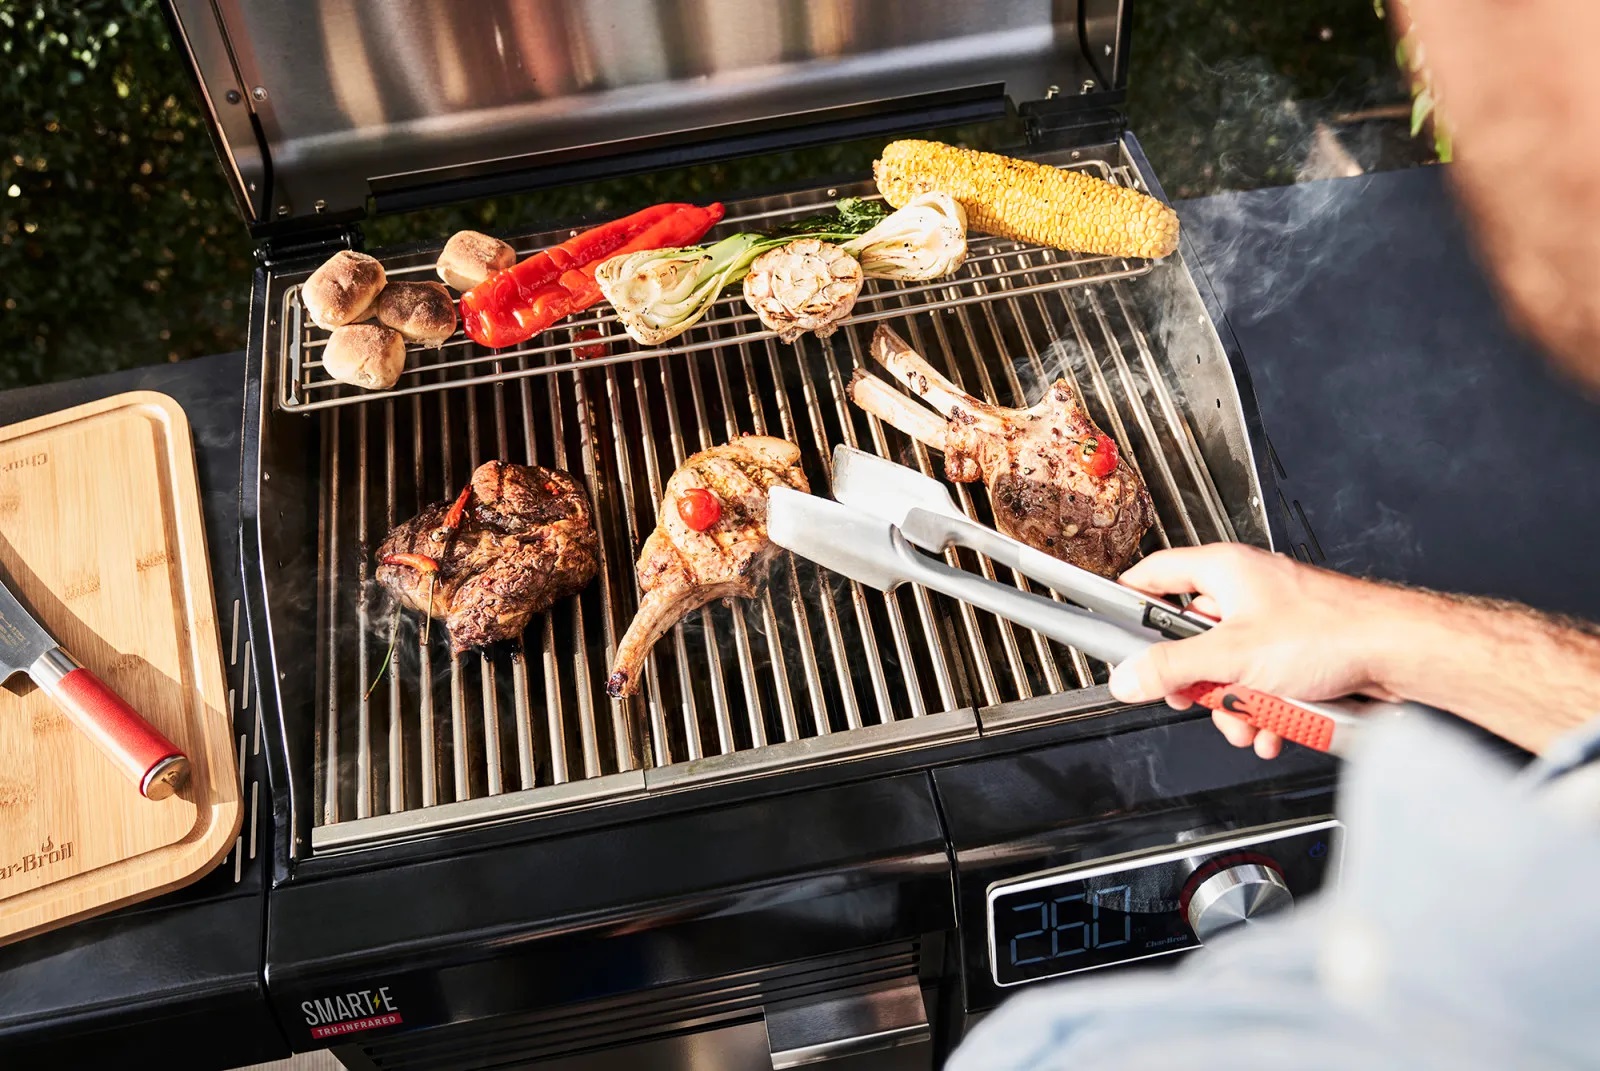 https://www.cookoutnews.com/wp-content/uploads/2023/03/Char-Broil-UK-SMART-E-Electric-Grill.jpg